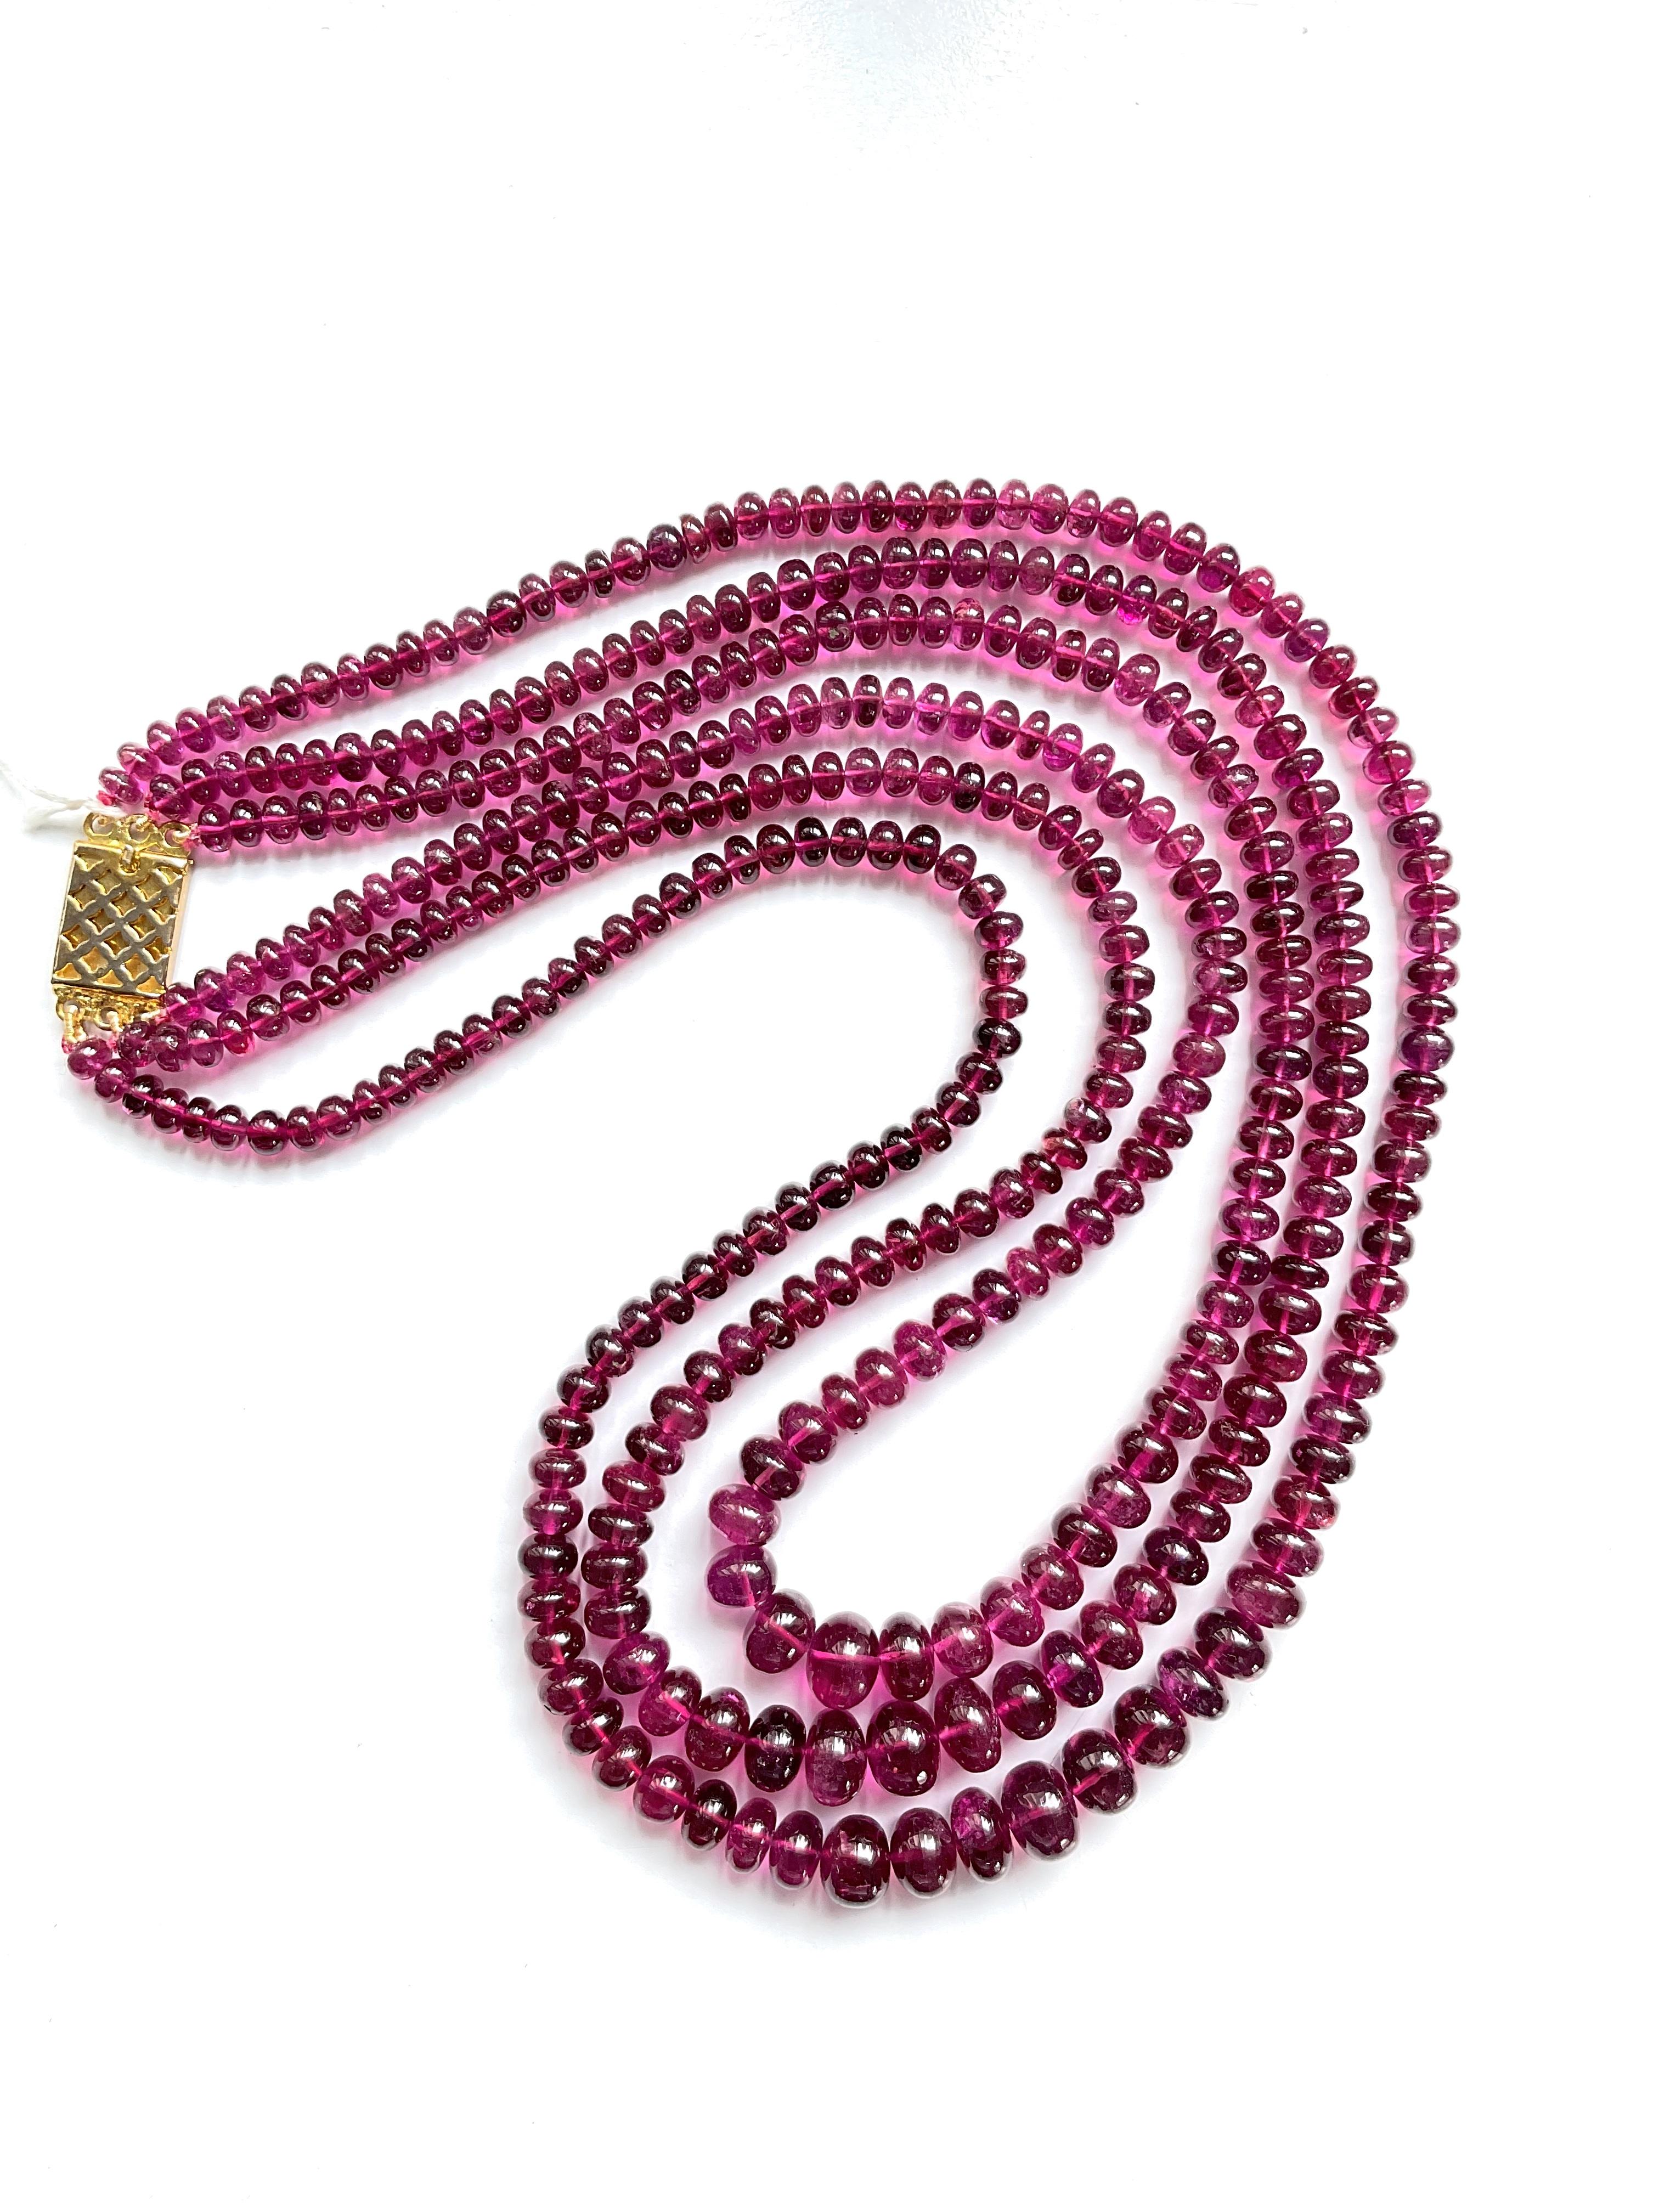 510.00 Carats Top Quality Rubellite Tourmaline Plain Beads Natural Gemstone For Sale 3